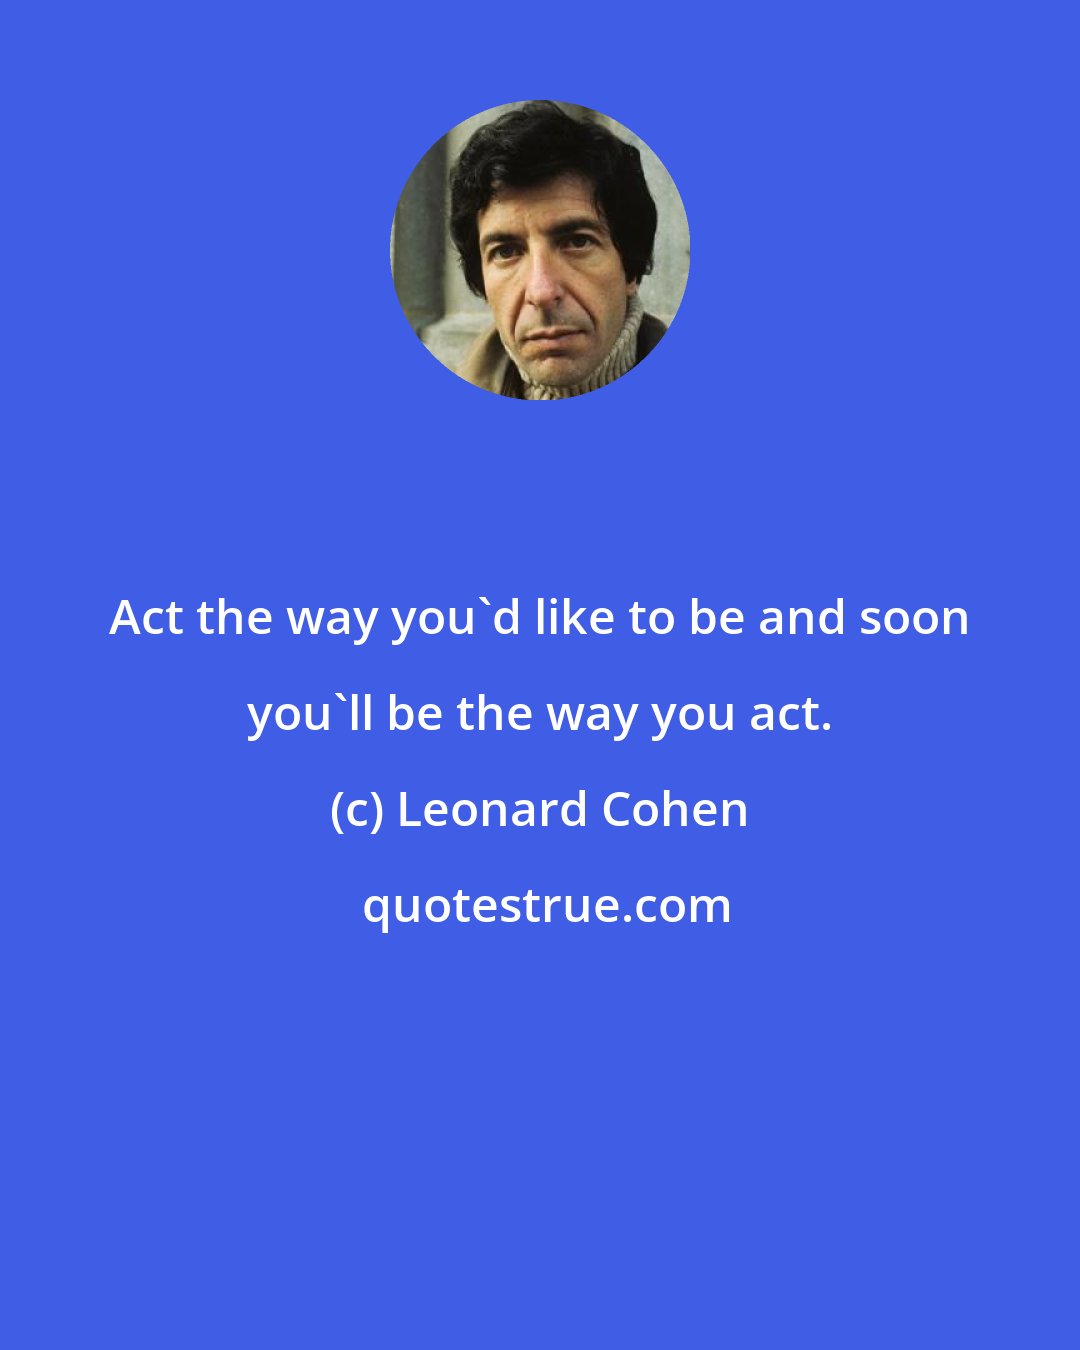 Leonard Cohen: Act the way you'd like to be and soon you'll be the way you act.